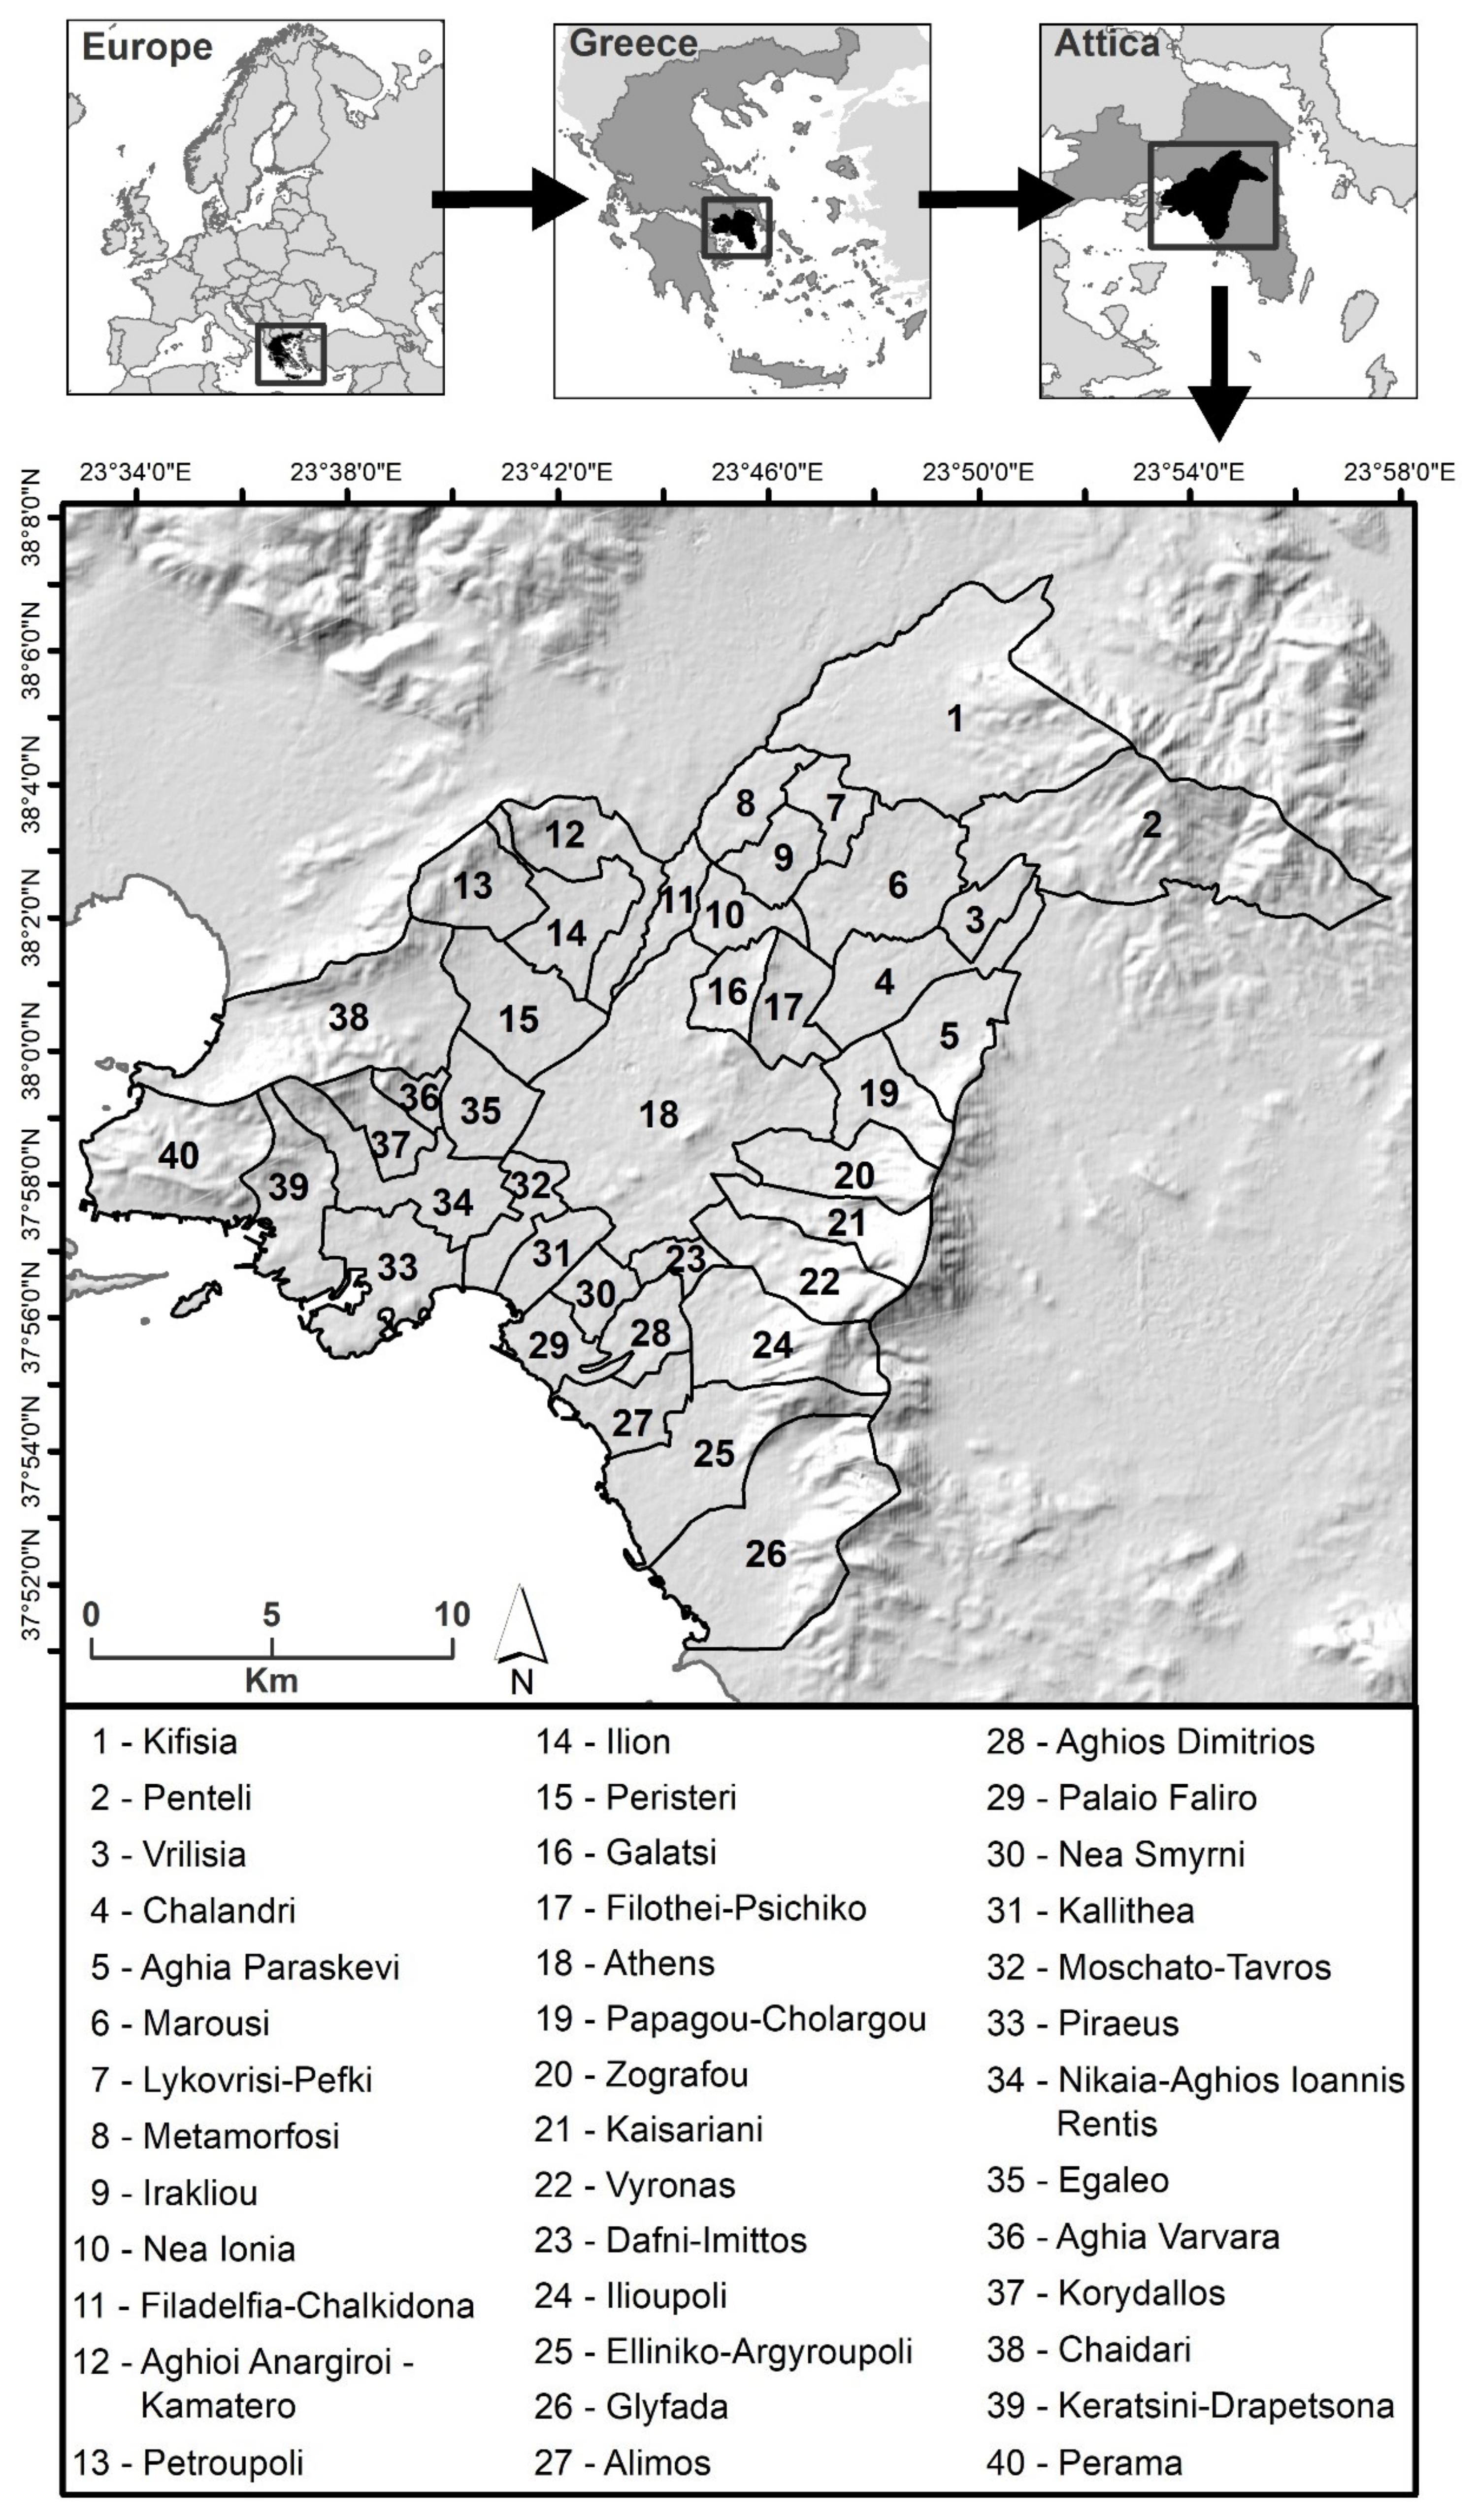 IJGI | Free Full-Text | Urban Quality of Life: Spatial Modeling and  Indexing in Athens Metropolitan Area, Greece